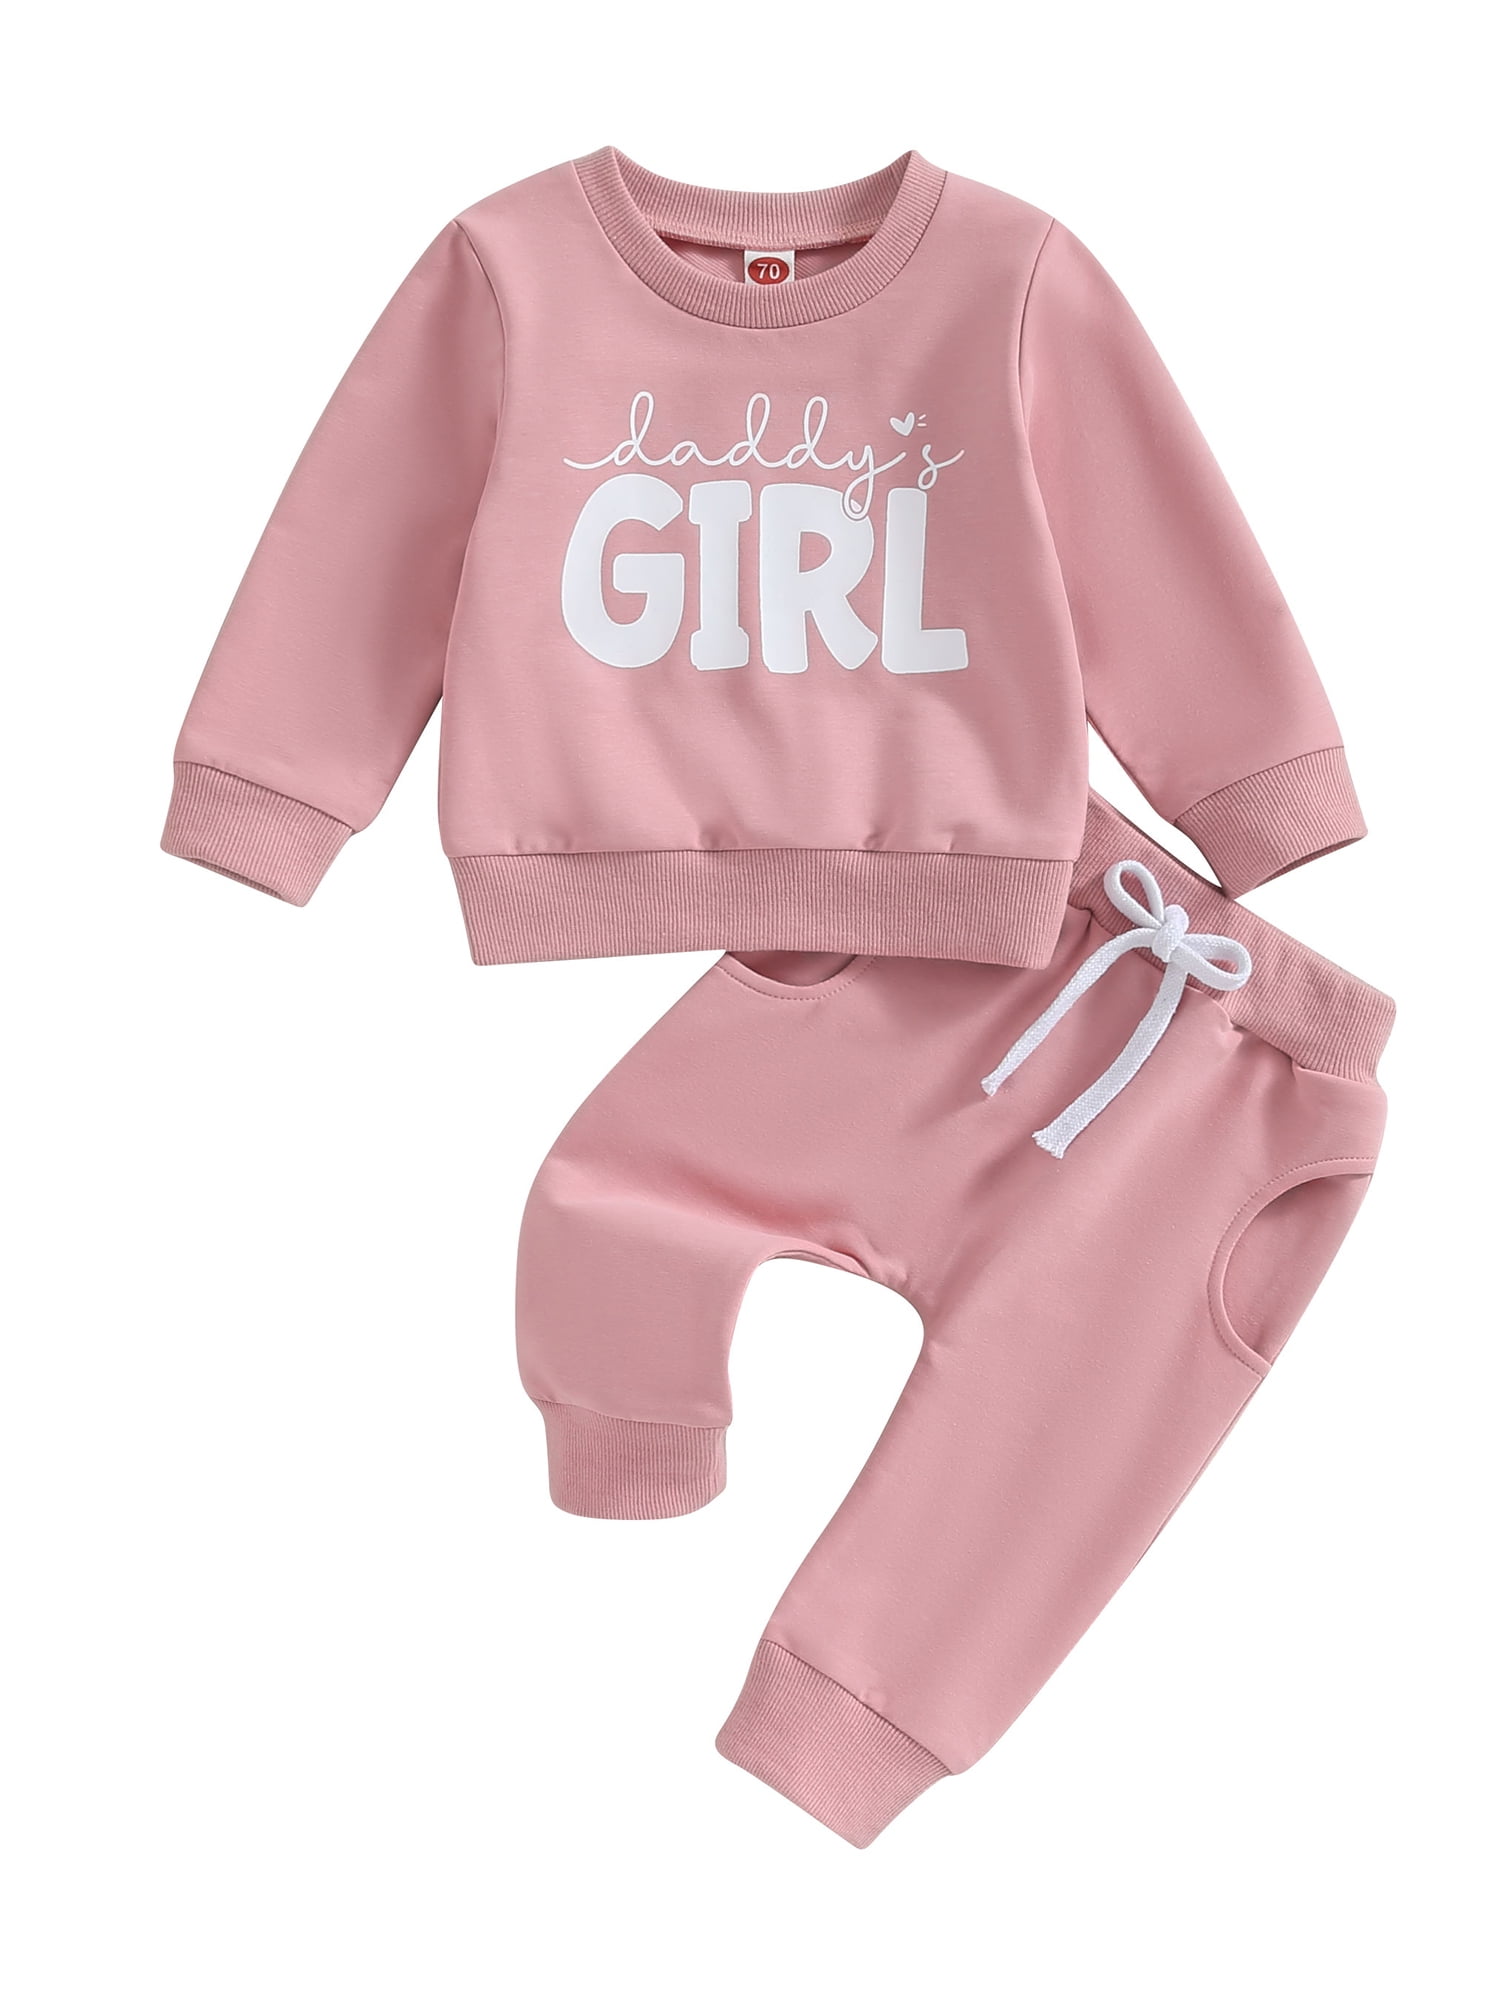 GXFC Toddler Girl Fall Outfits Clothes 6M 12M 18M 2T 3T Kids Girl Long ...